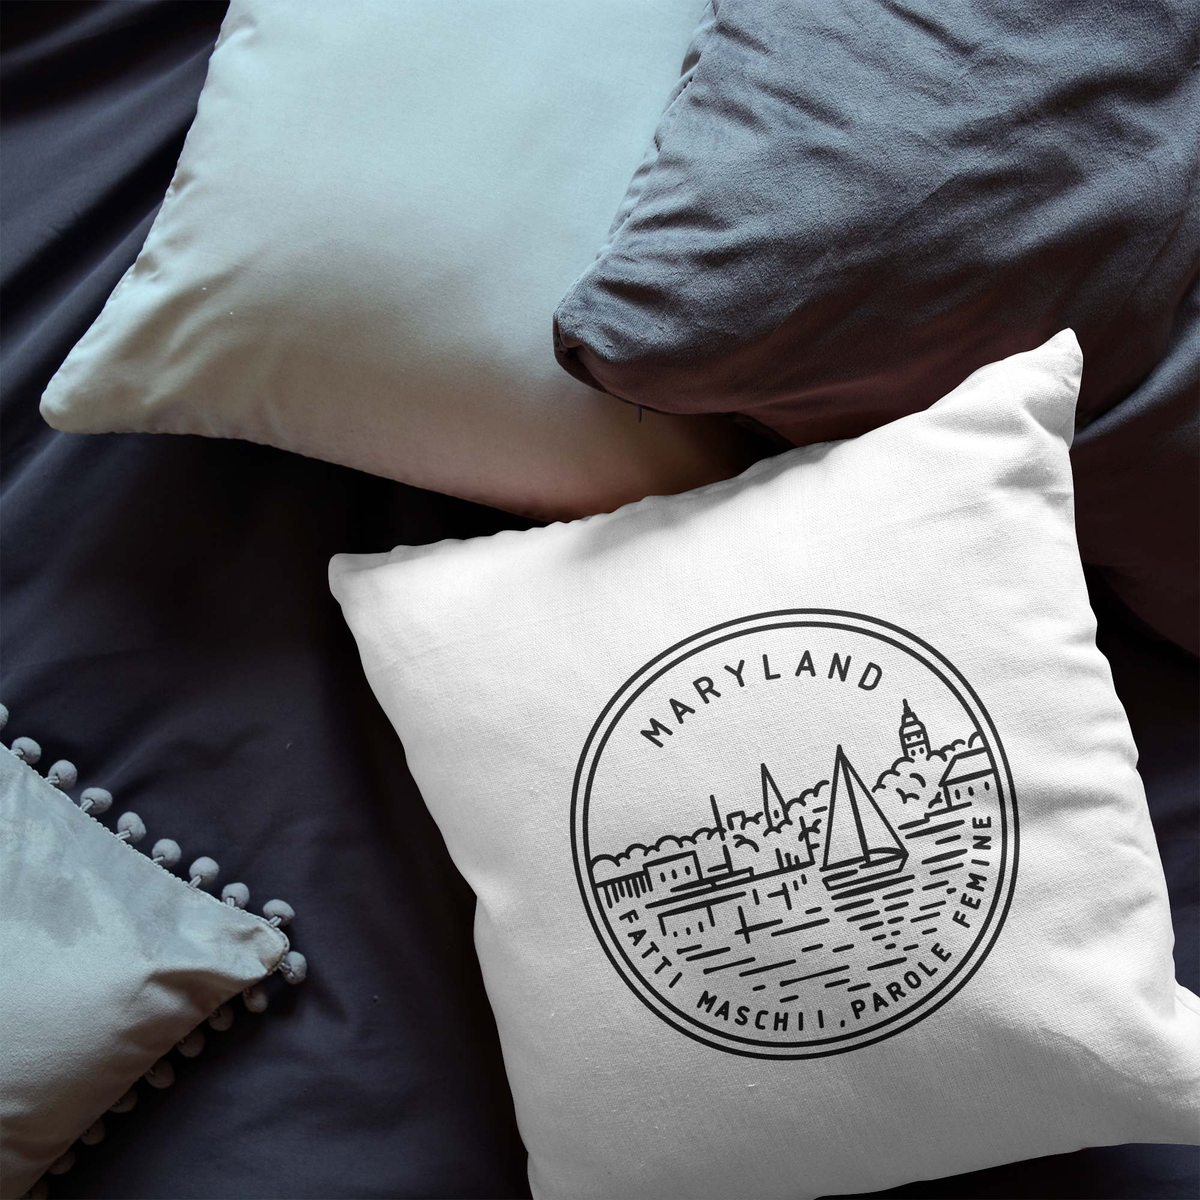 Maryland State Crest Throw Pillow